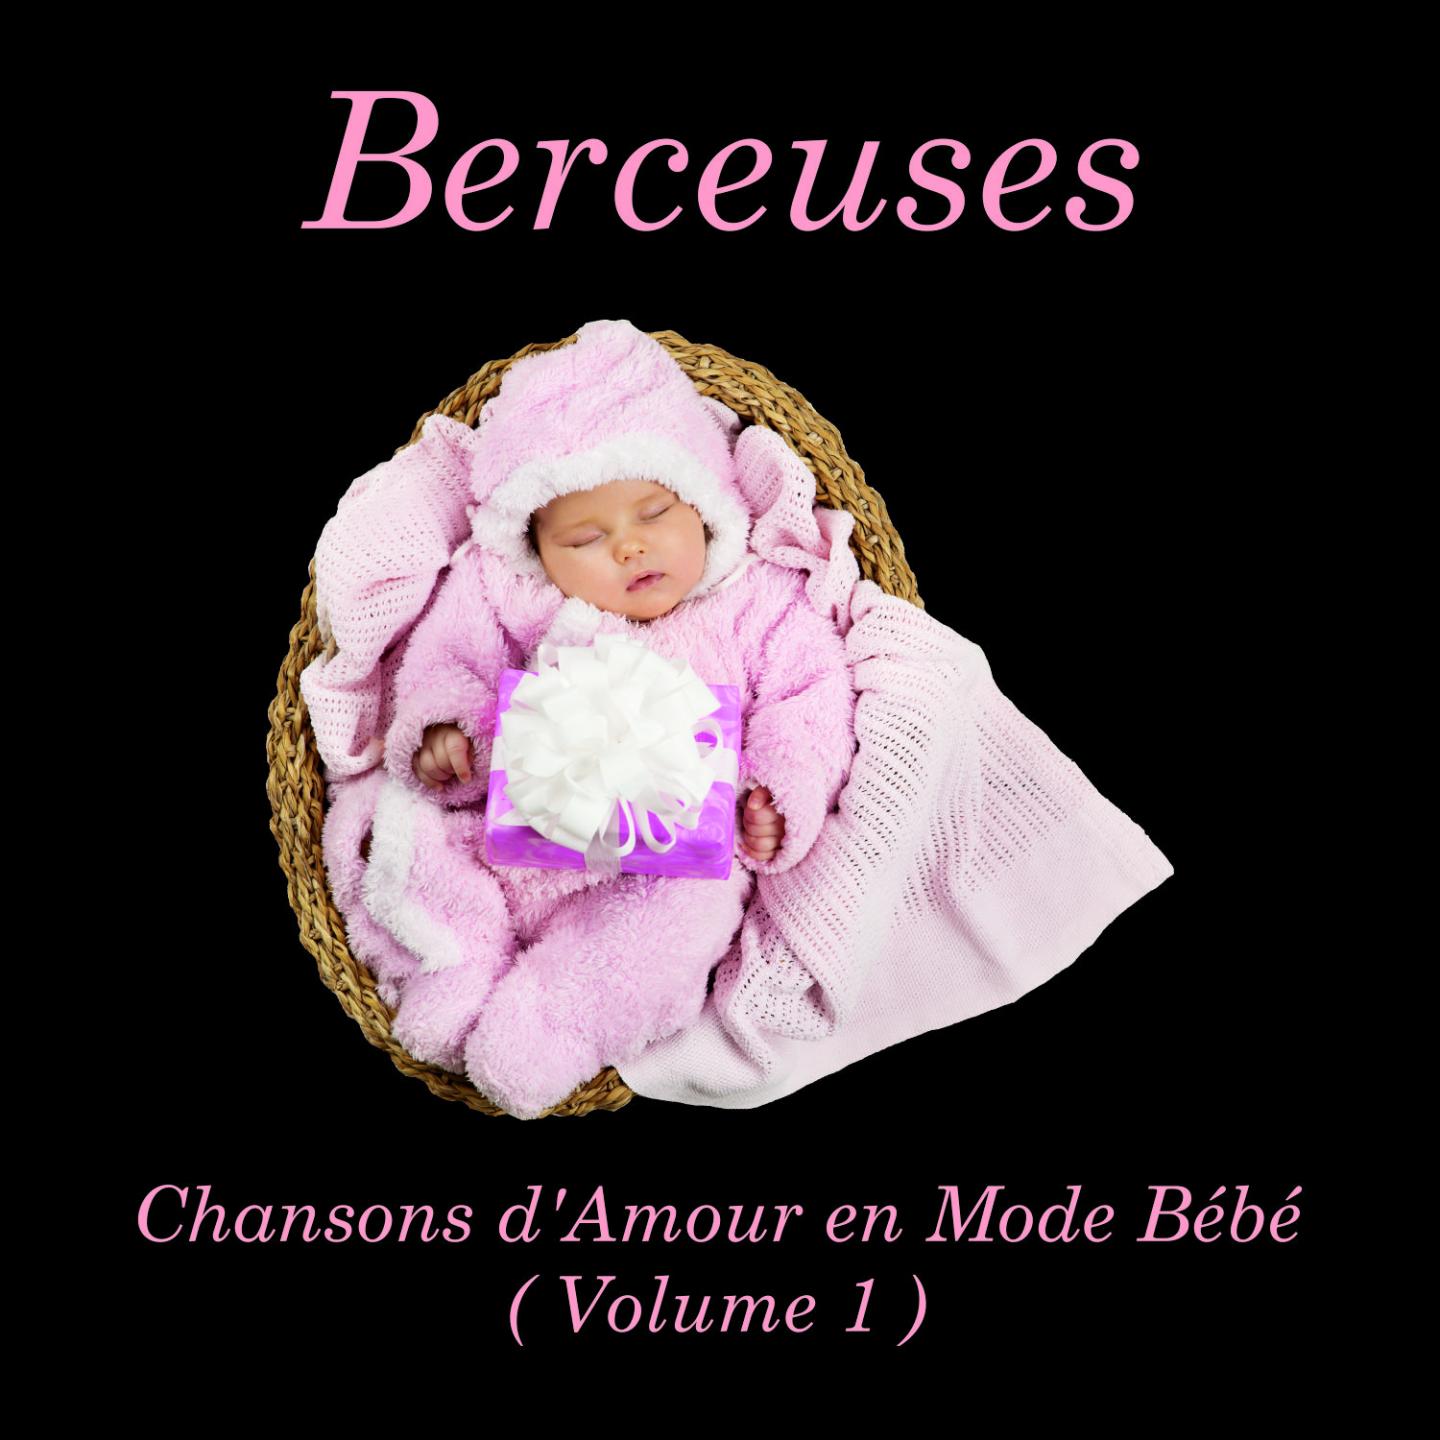 Berceuses: Chansons d' Amour en Mode Be be